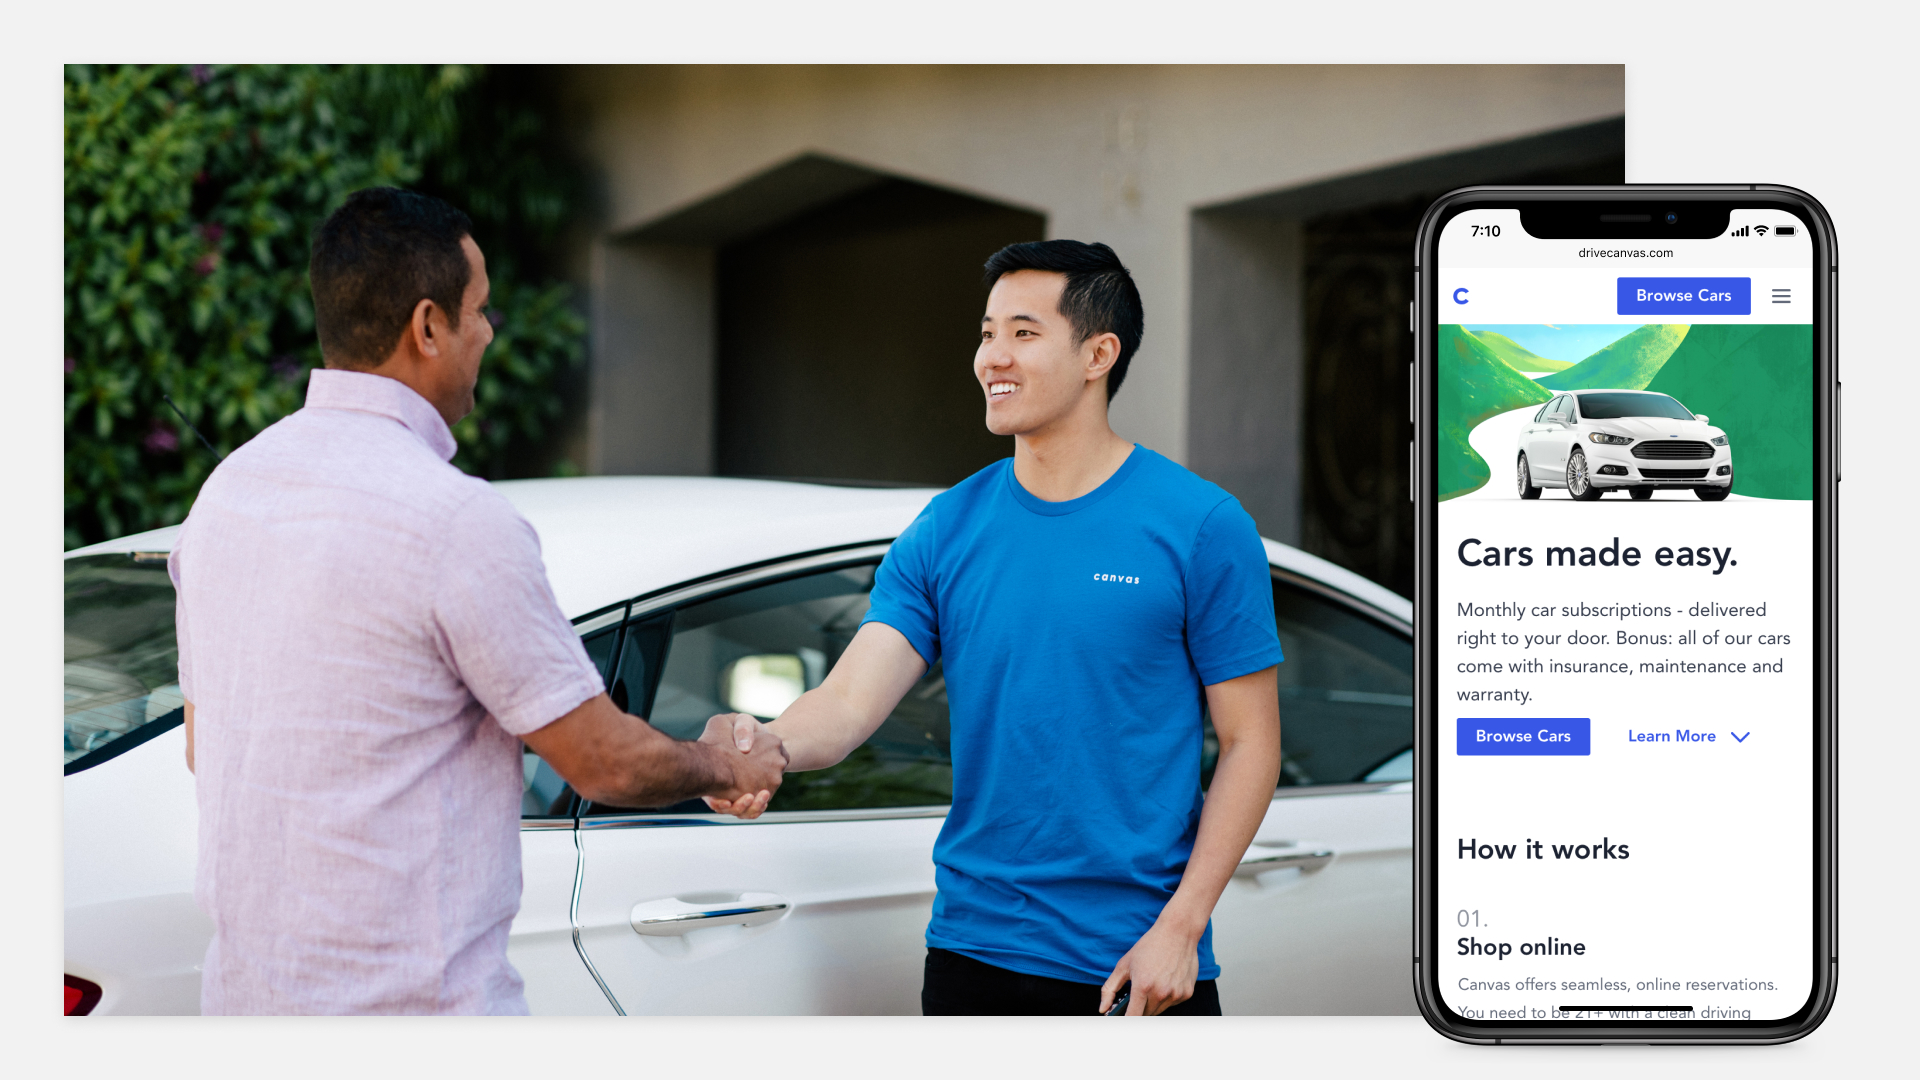 Photograph of two men shaking hands in front of a car with picture of mobile website for drivecanvas.com overlayed